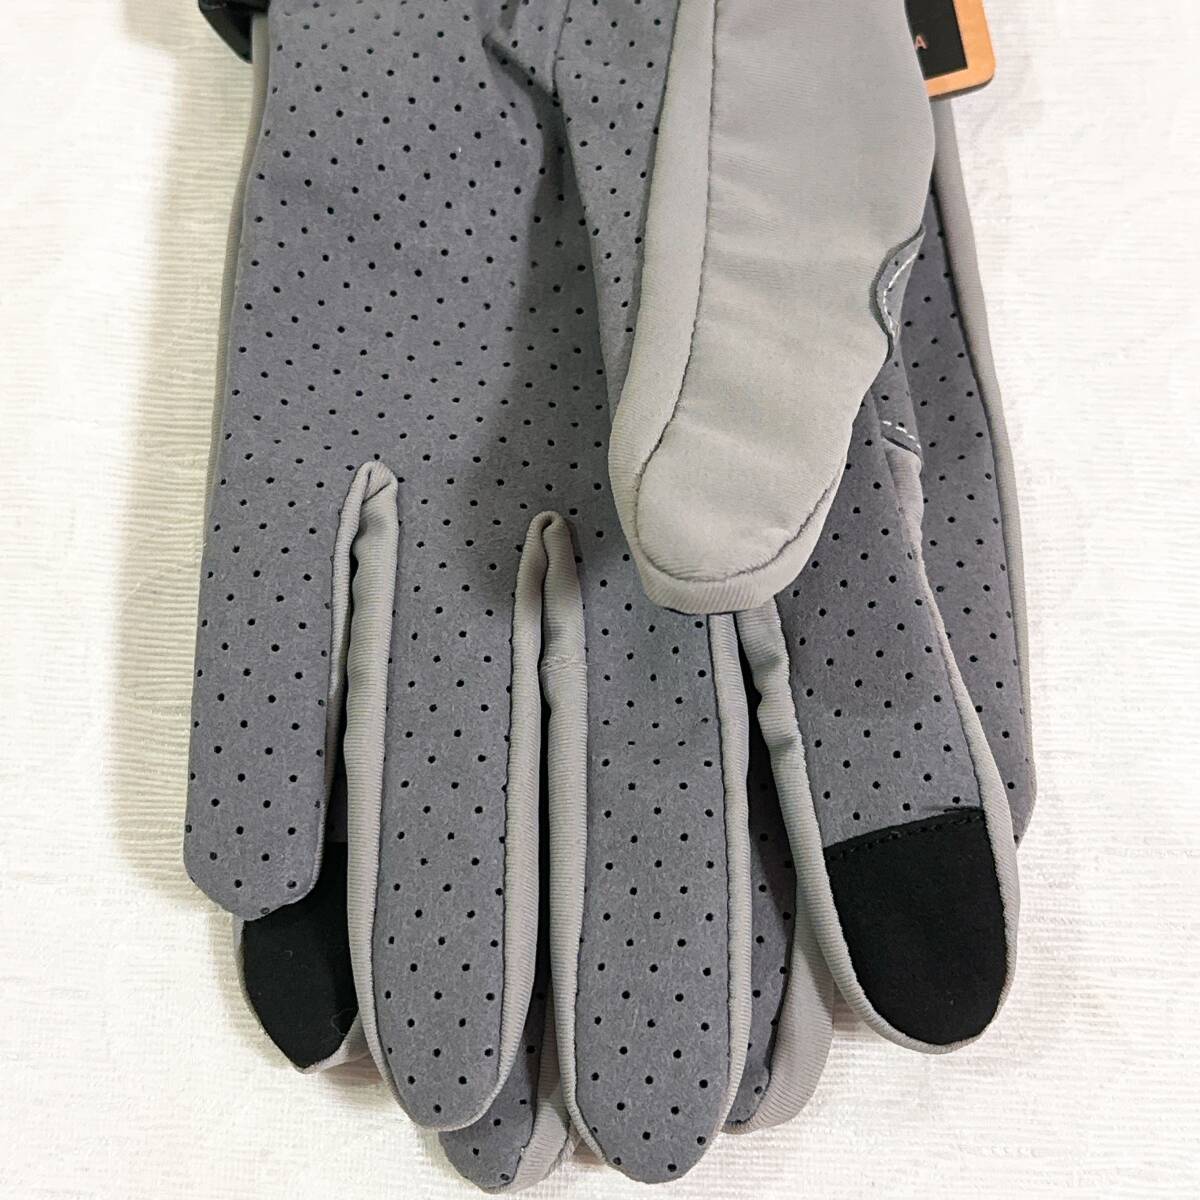  new goods 45 OUTDOOR RESEARCH for summer thin speed . trekking glove gray L